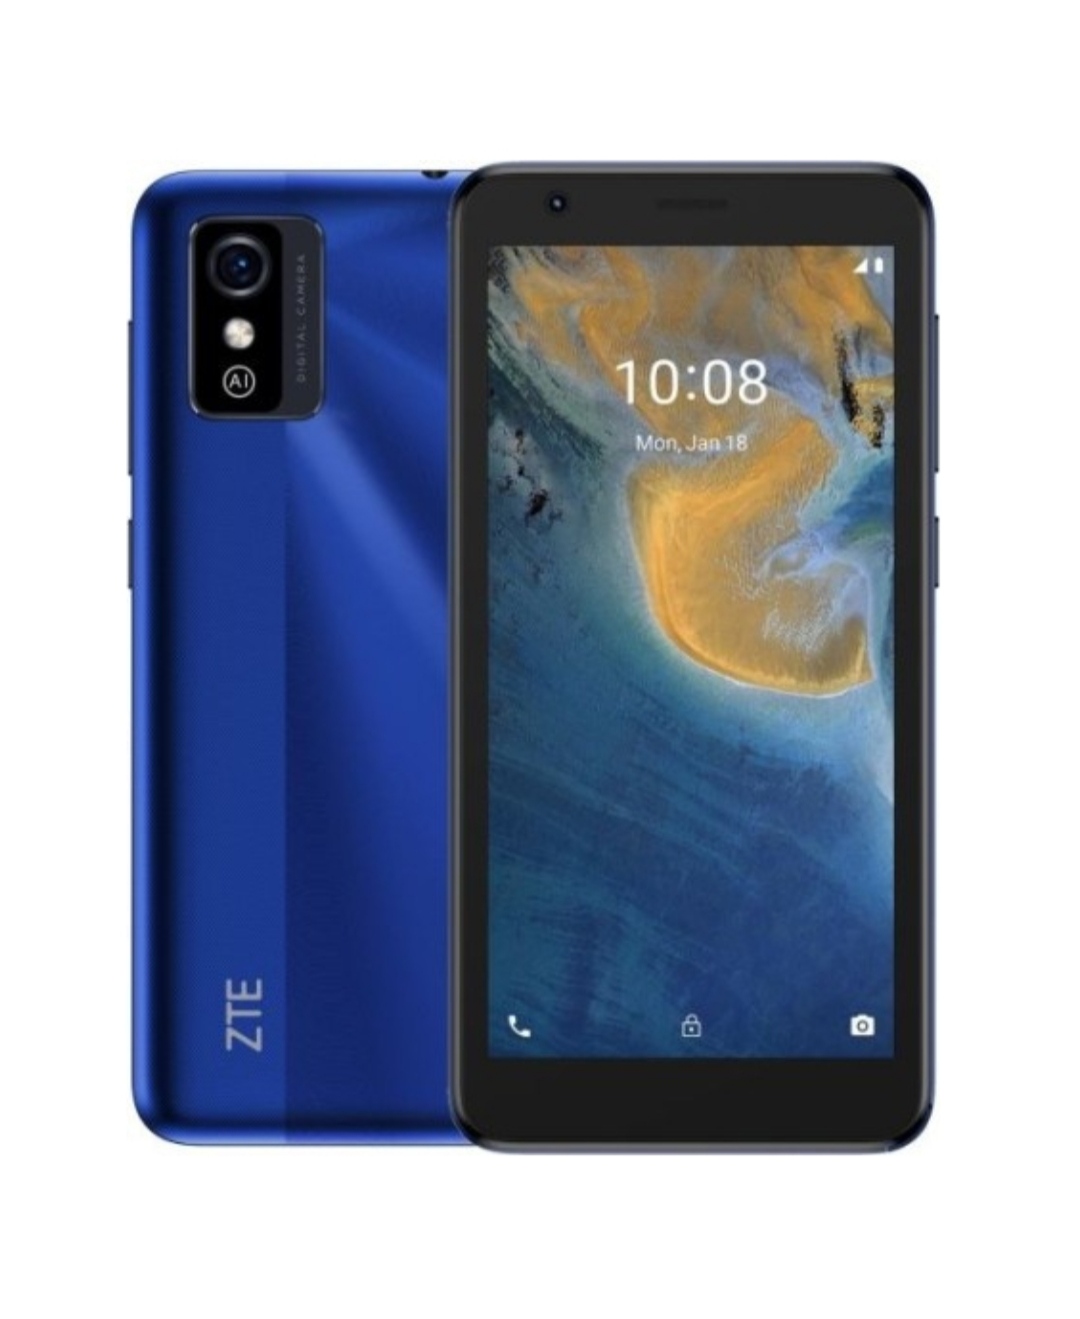 ZTE Blade L9 Smartphone | See Specs and Features | DroidAfrica